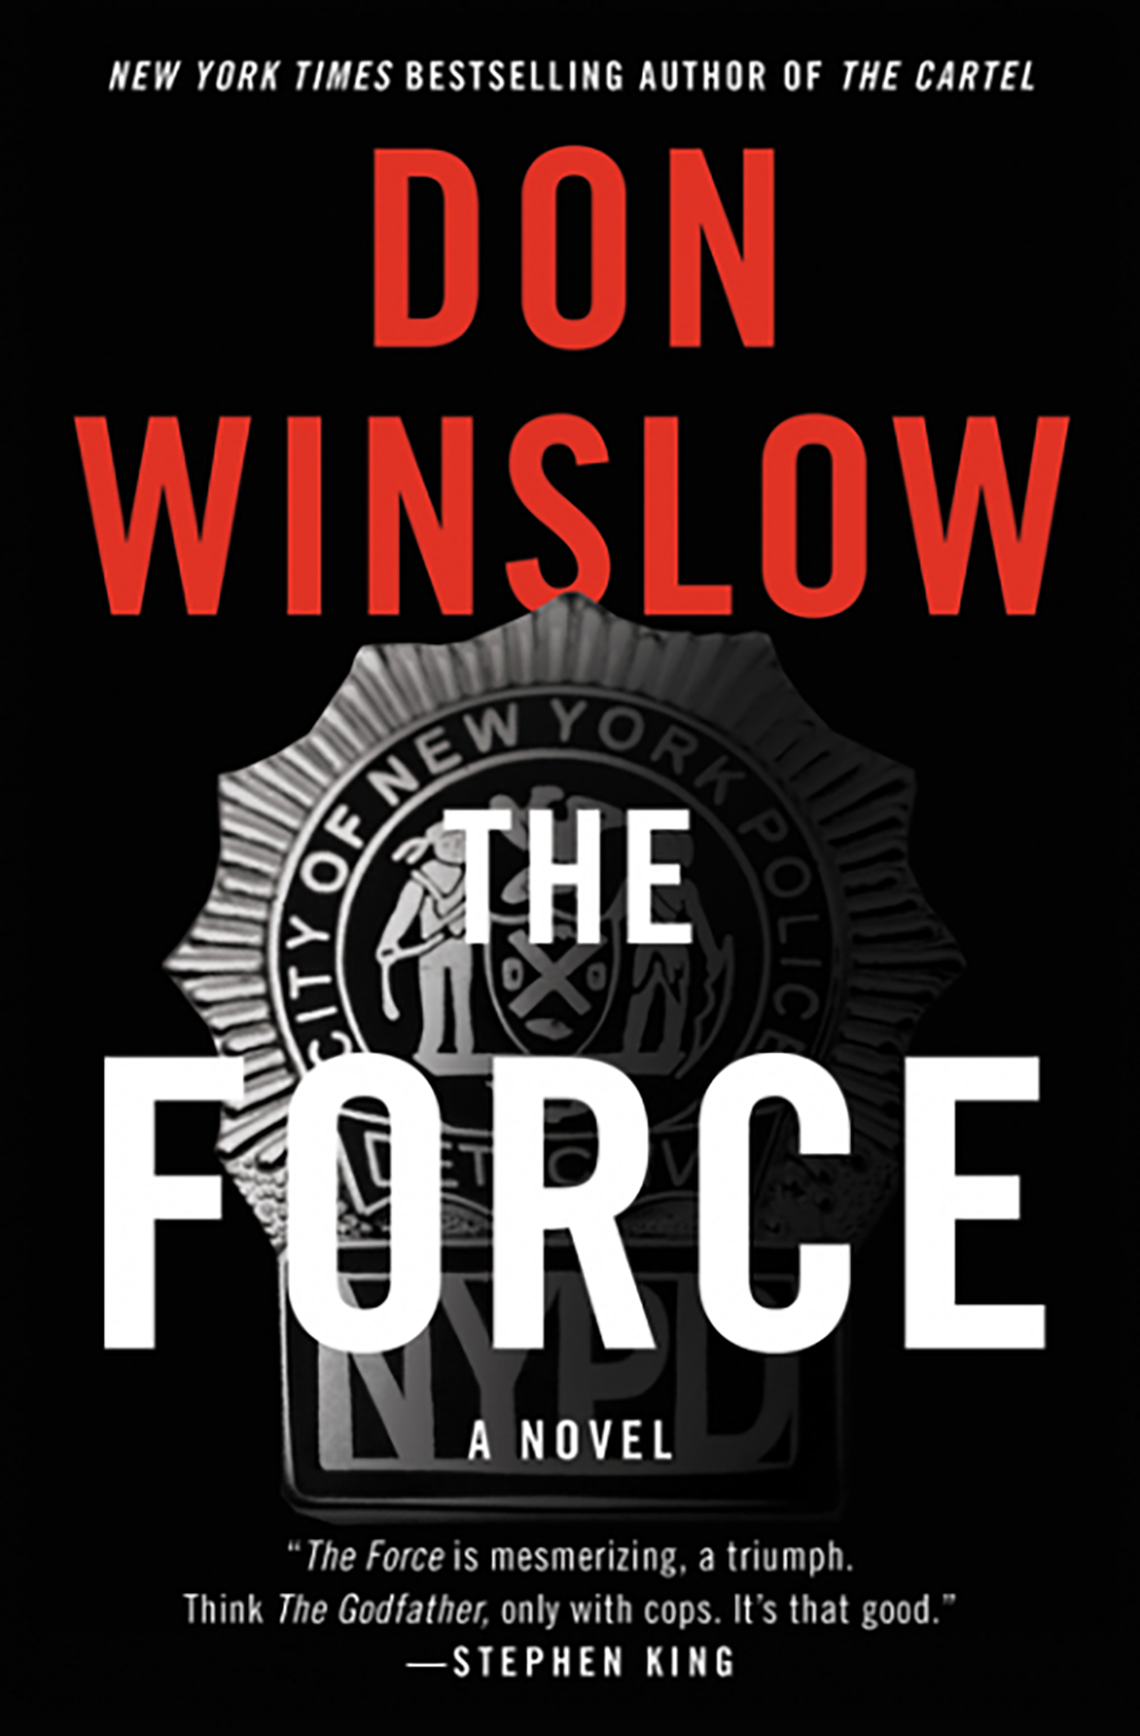 The Force, By Don Winslow